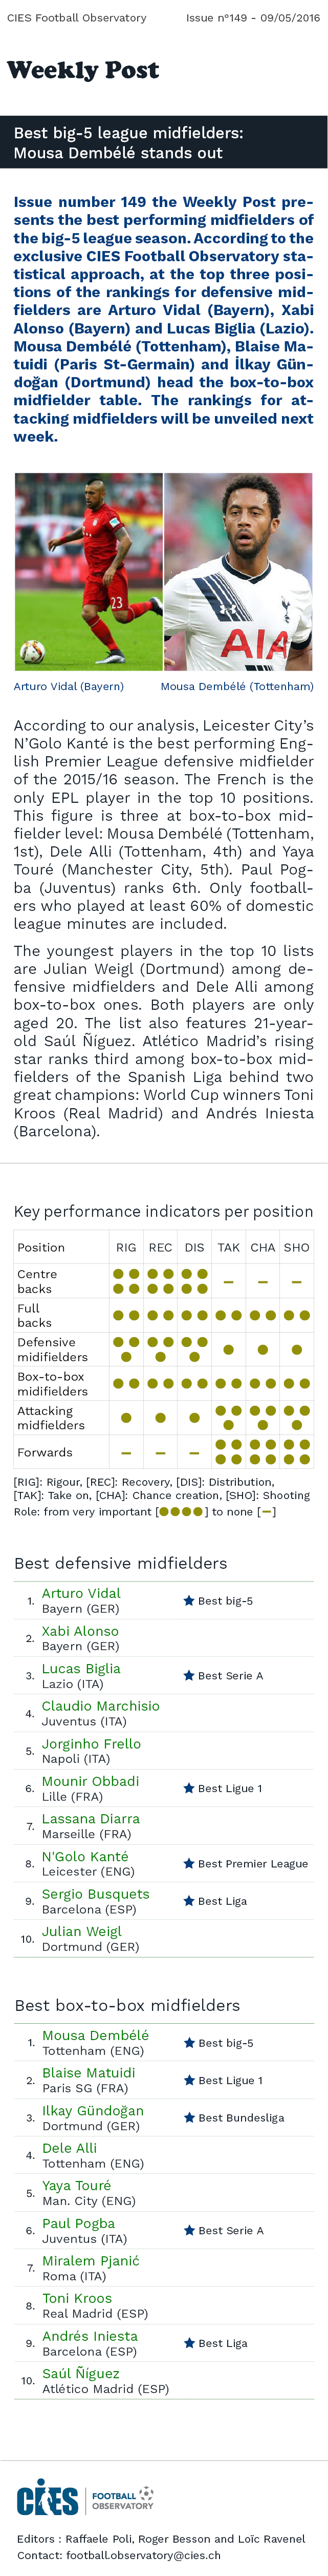 Figure: best defensive and box-to-box midfielders, big-5 leagues